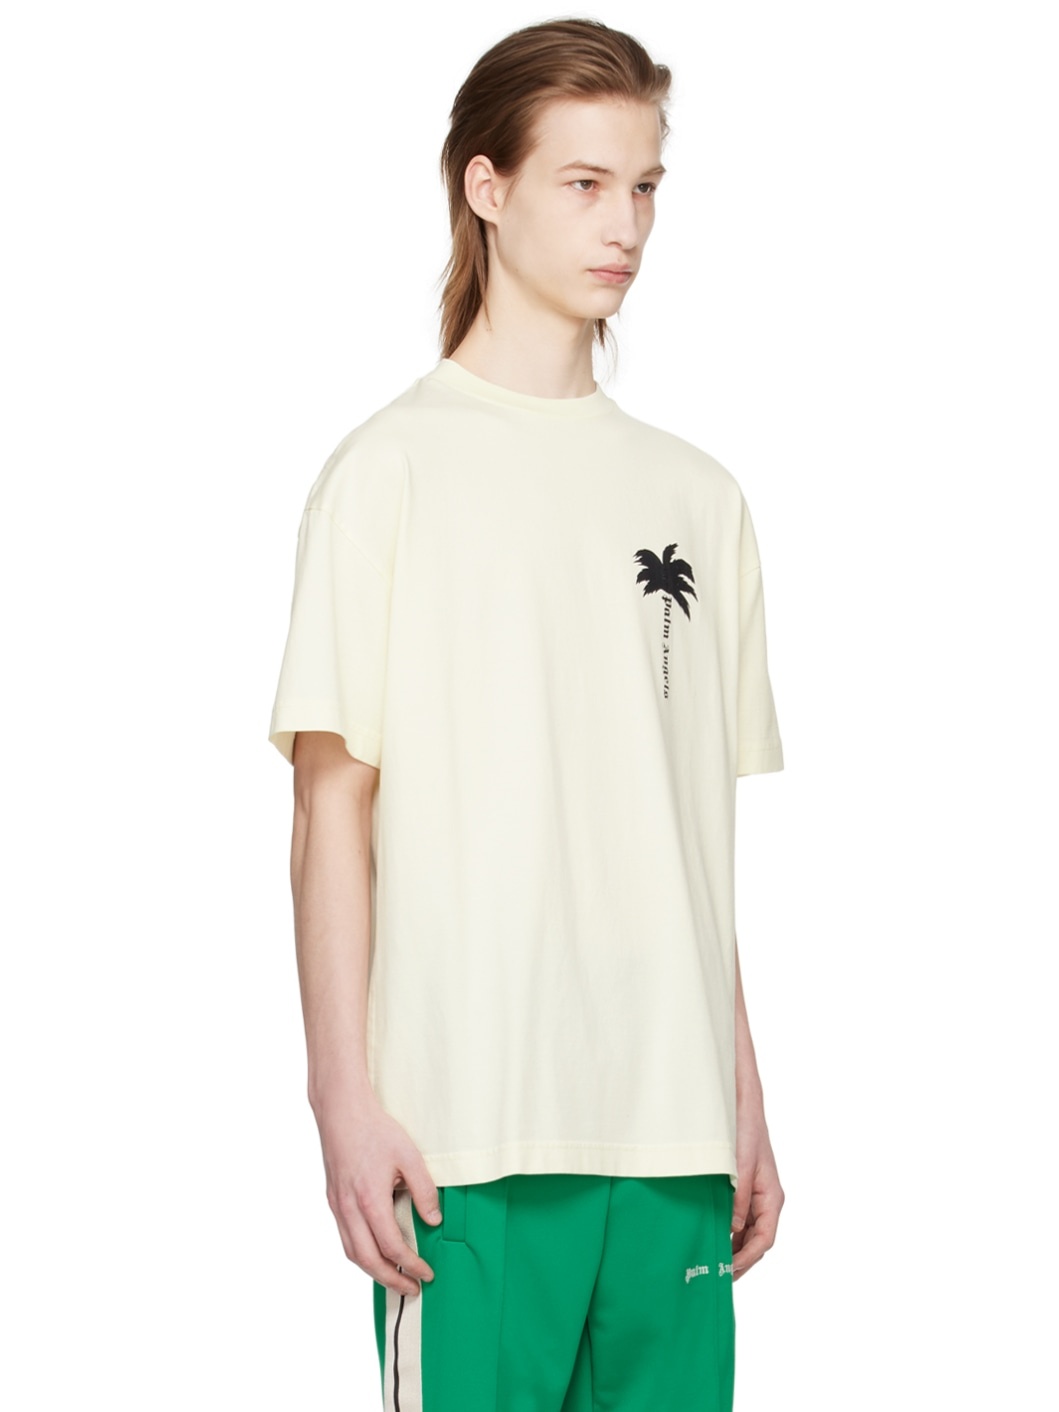 Off-White 'The Palm' T-Shirt - 2